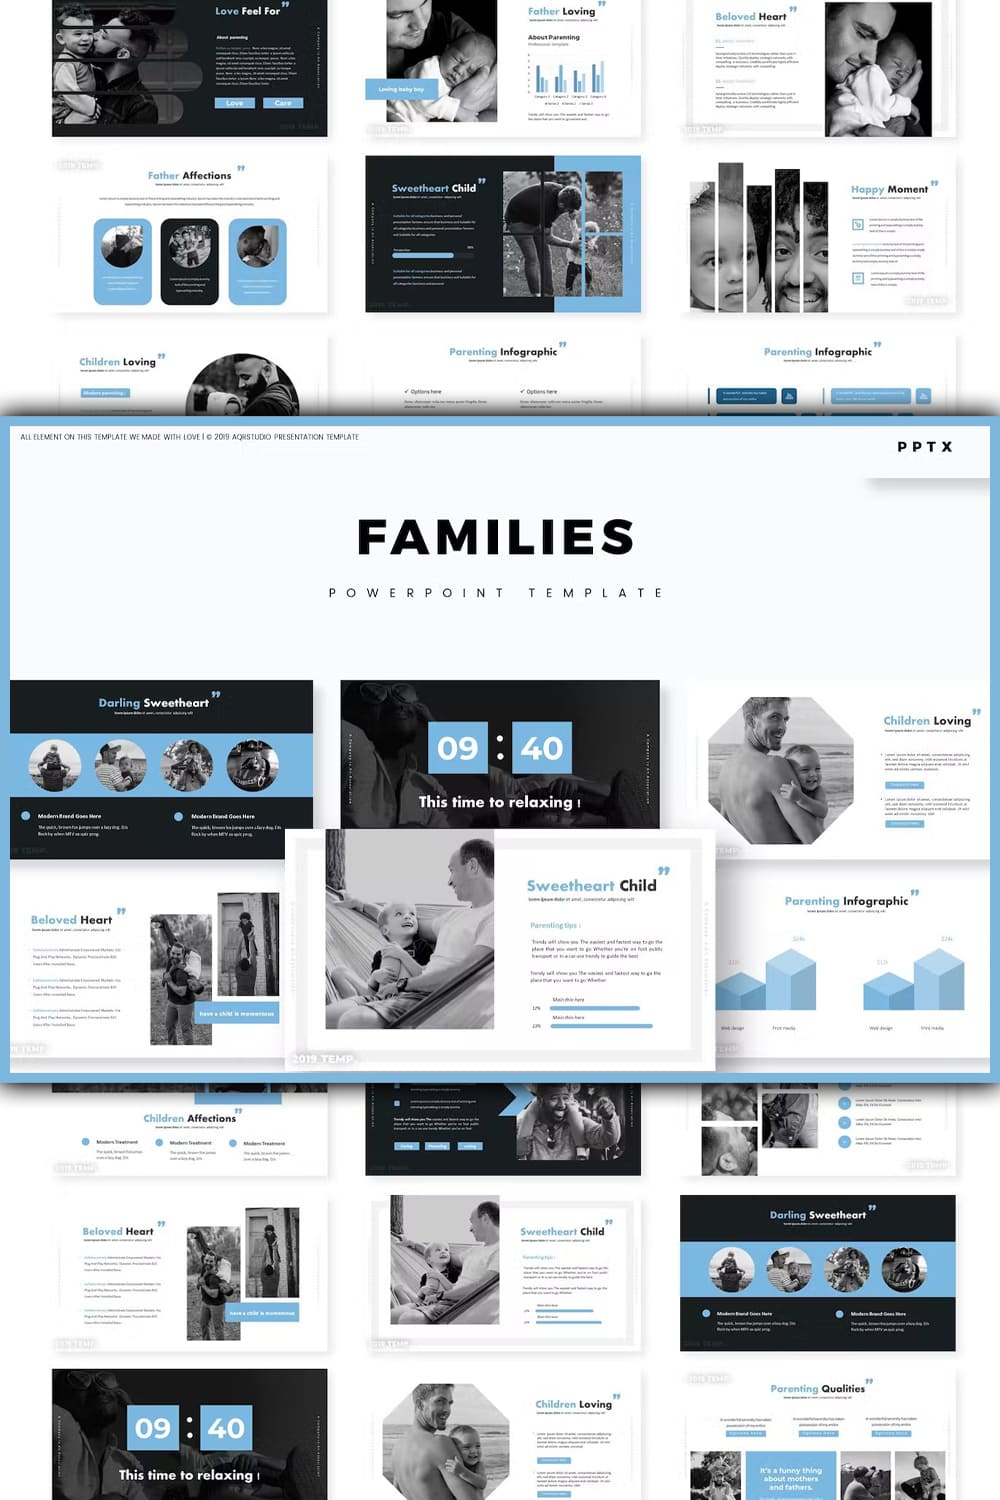 Families powerpoint template - pinterest image preview.